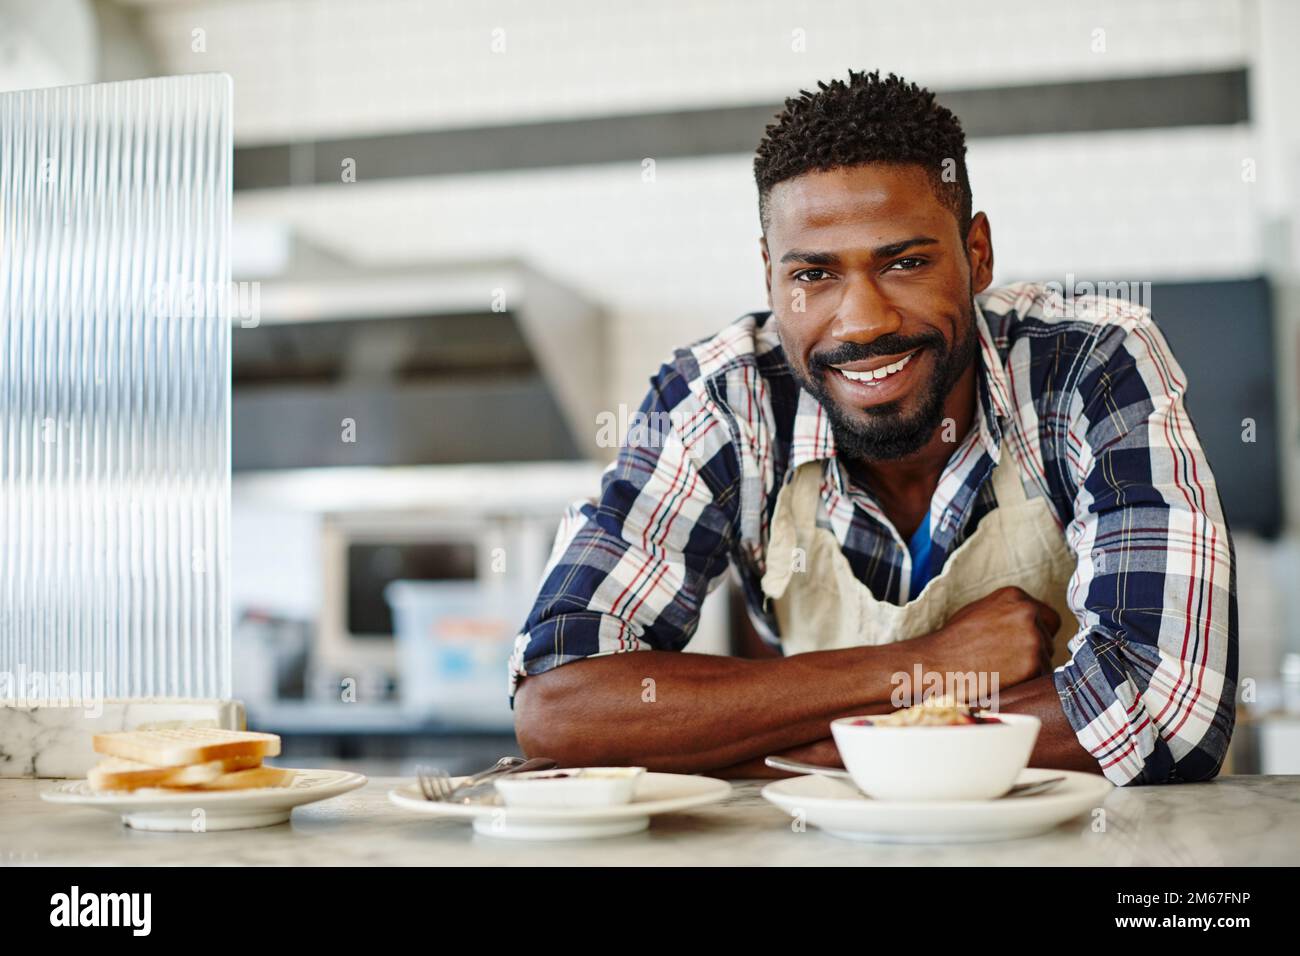 Start your day with a healthy breakfast. Cropped portrait of a handsome young man working in a coffee shop. Stock Photo